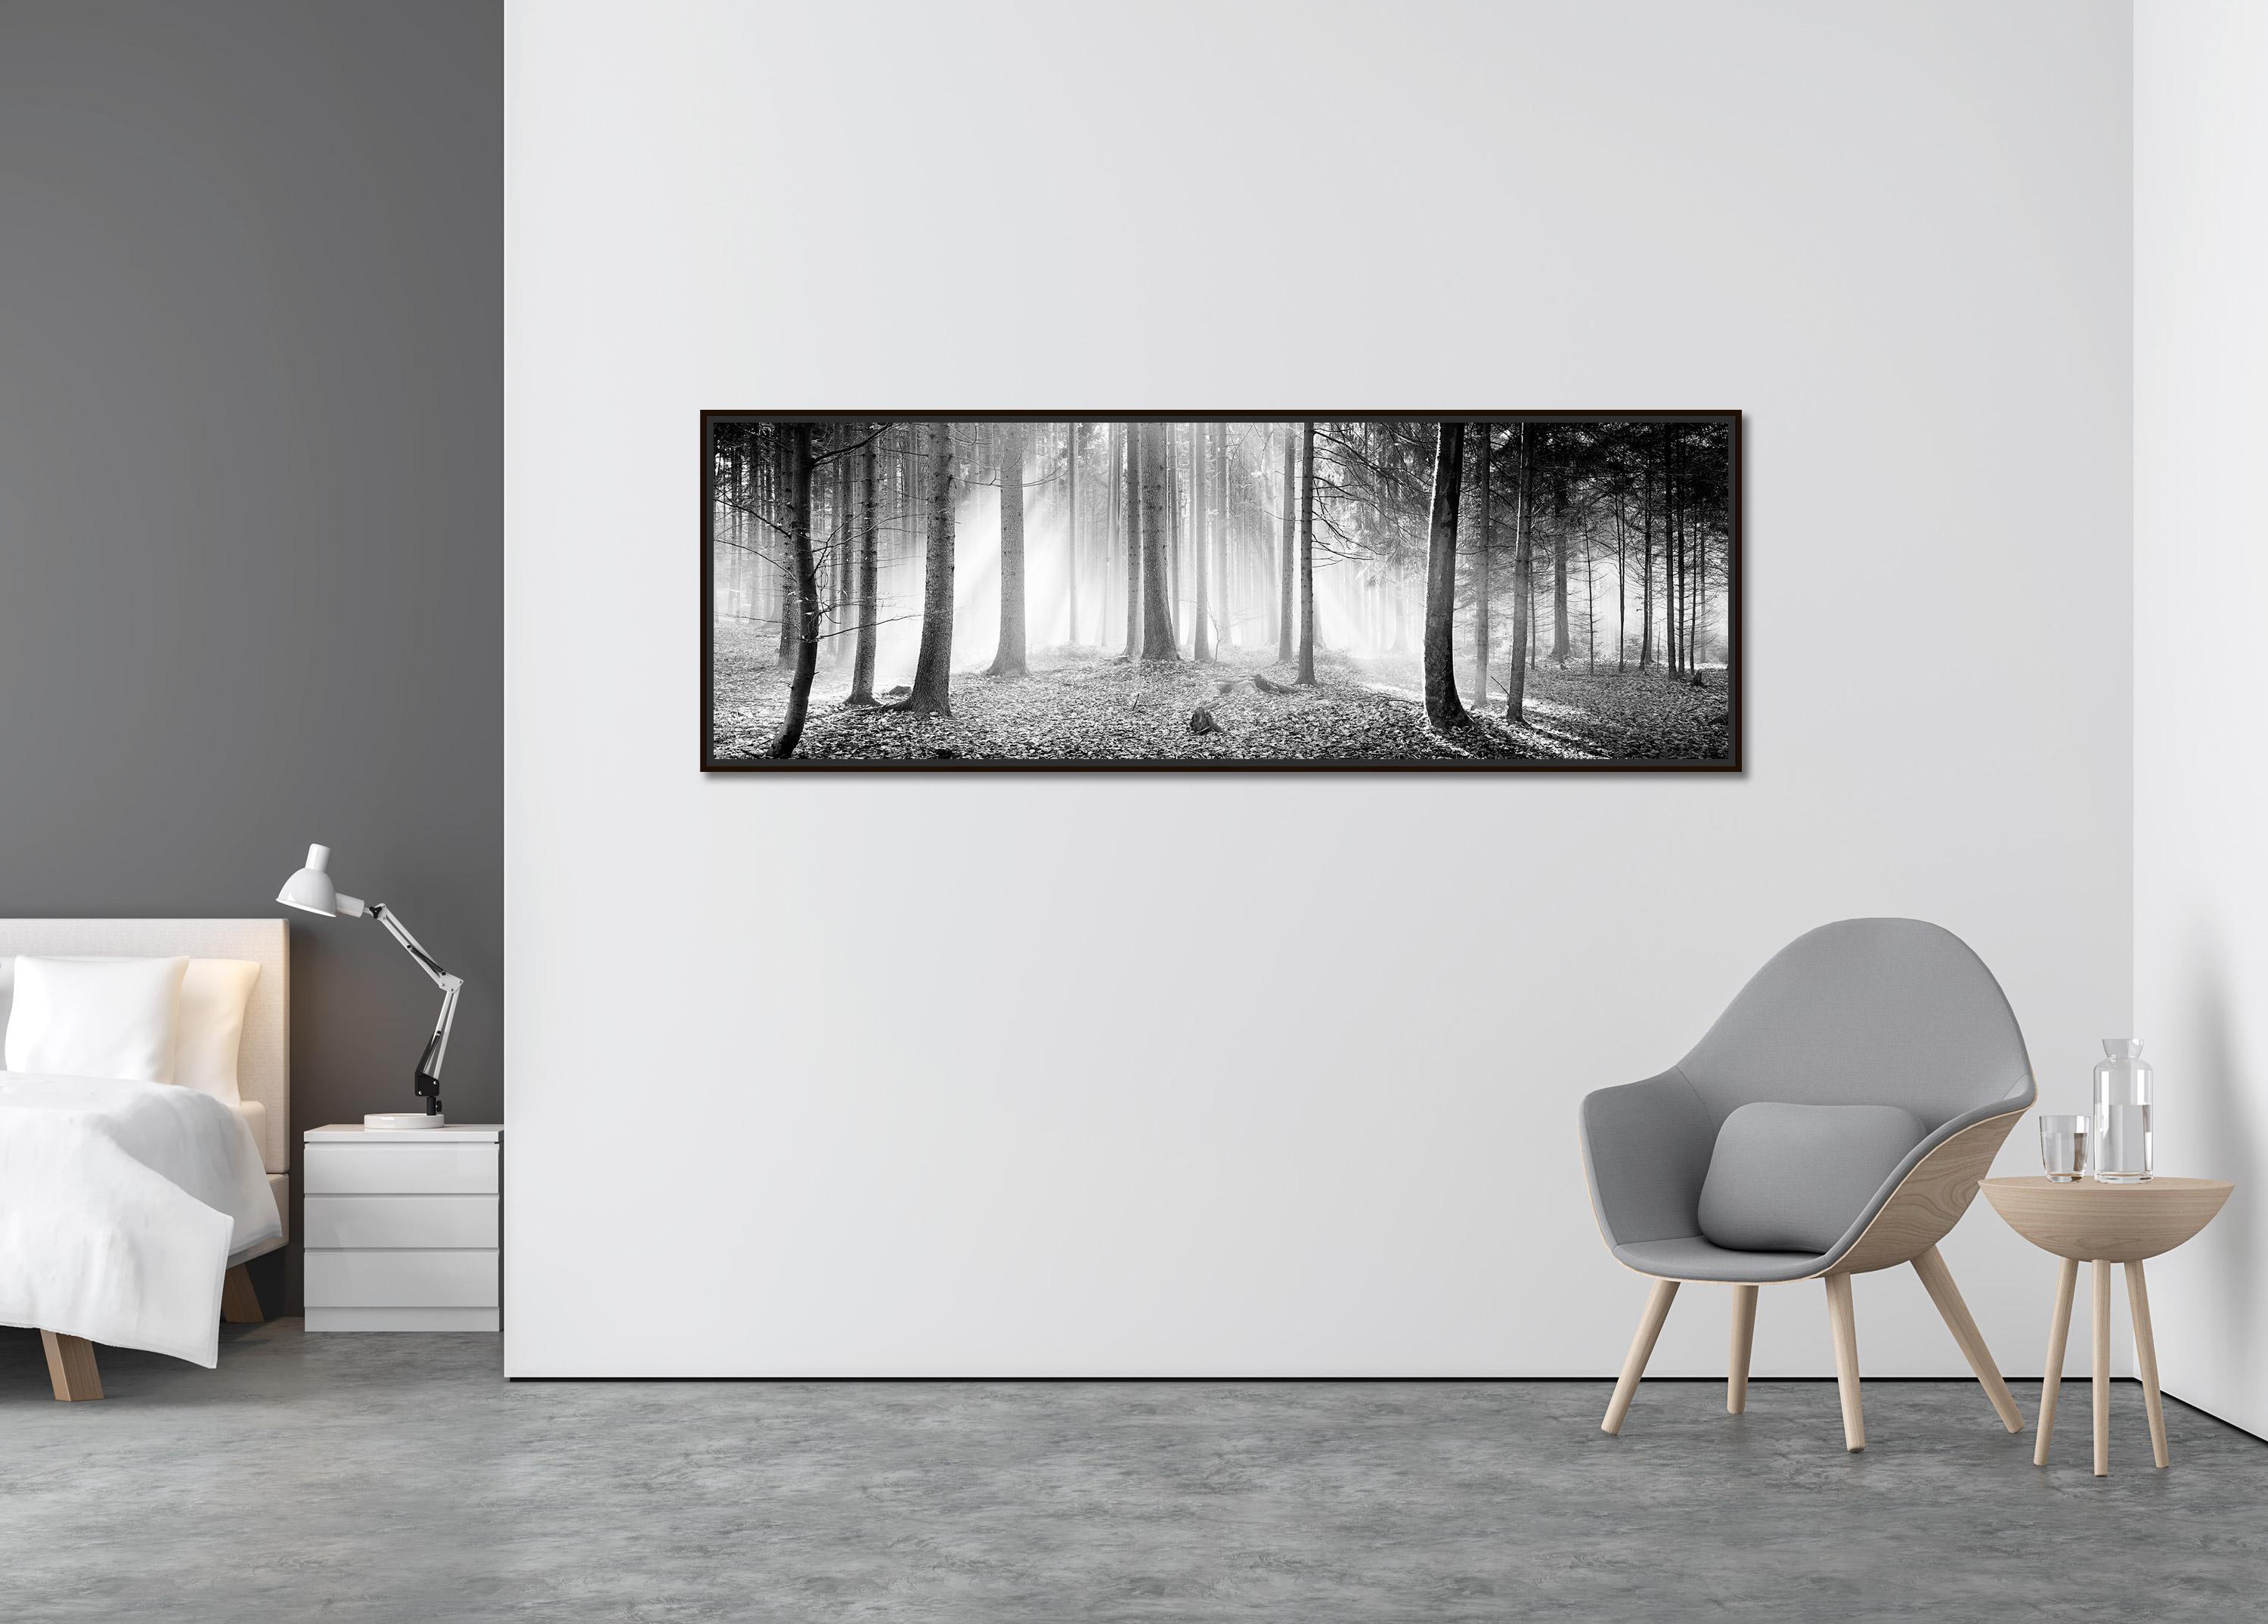 Enchanted Forest foggy sunny morning Austria black white landscape photography - Contemporary Photograph by Gerald Berghammer, Ina Forstinger